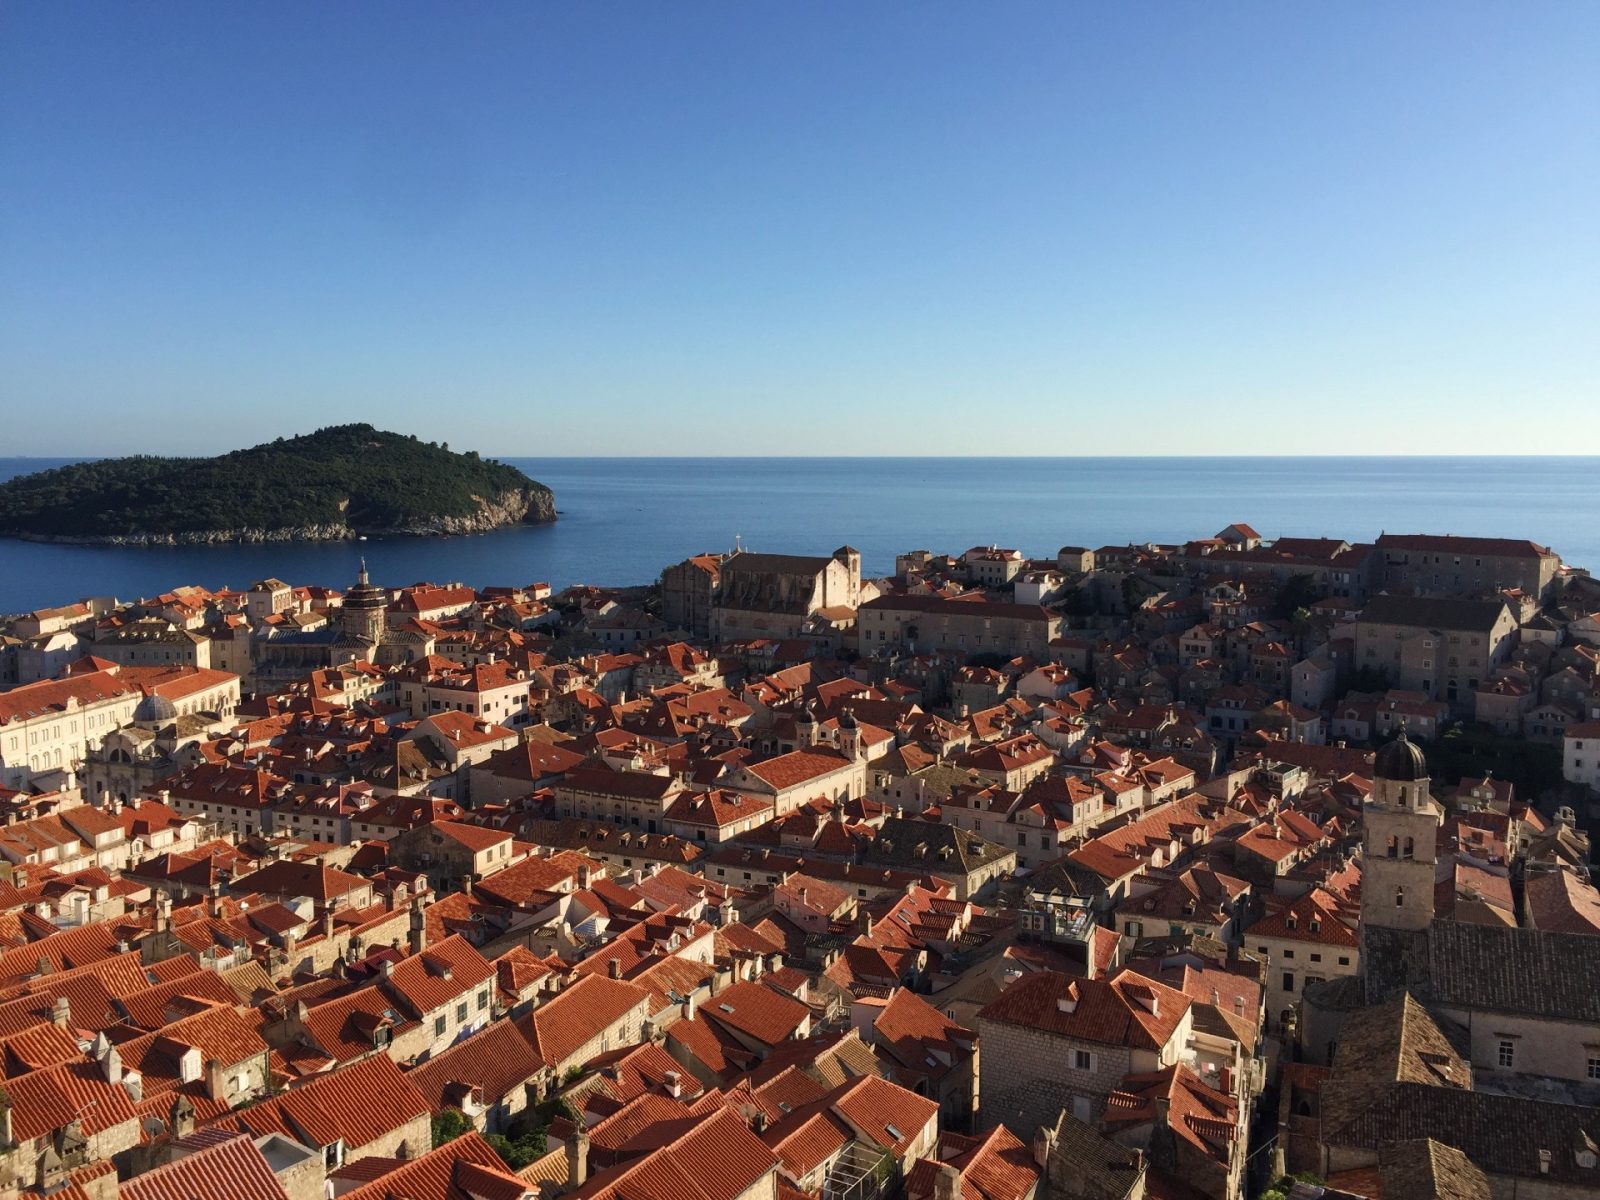 Dubrovnik - The perfect stop on a 10 day itinerary for Croatia!